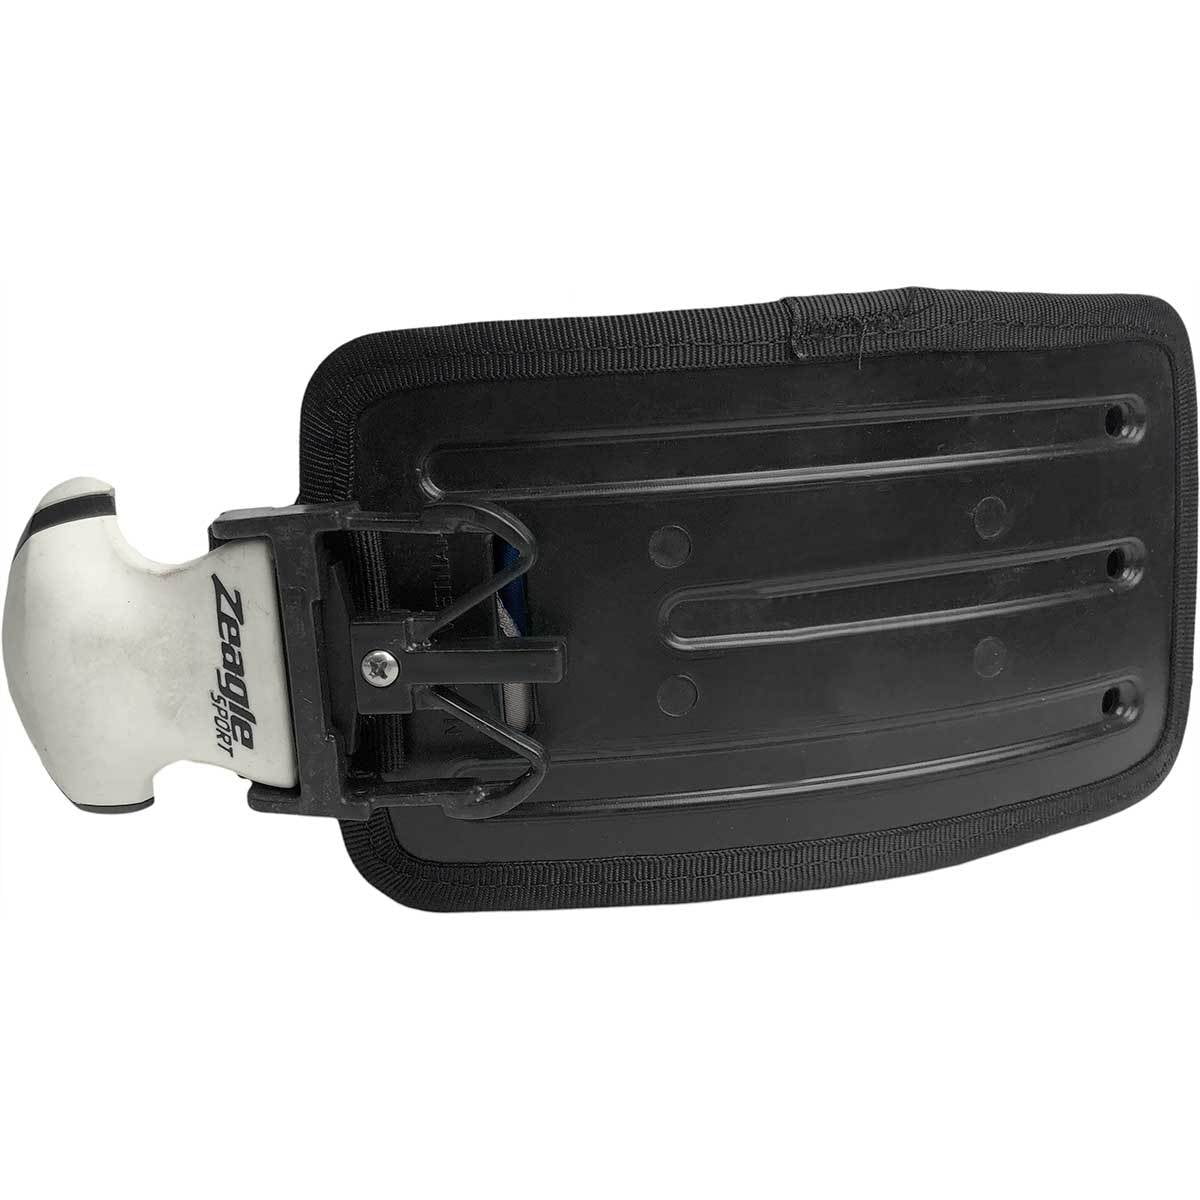 IST Dive Pocket Holster Belt for Scuba Diving Storage Cargo Thigh Pouch for Gear & Equipment